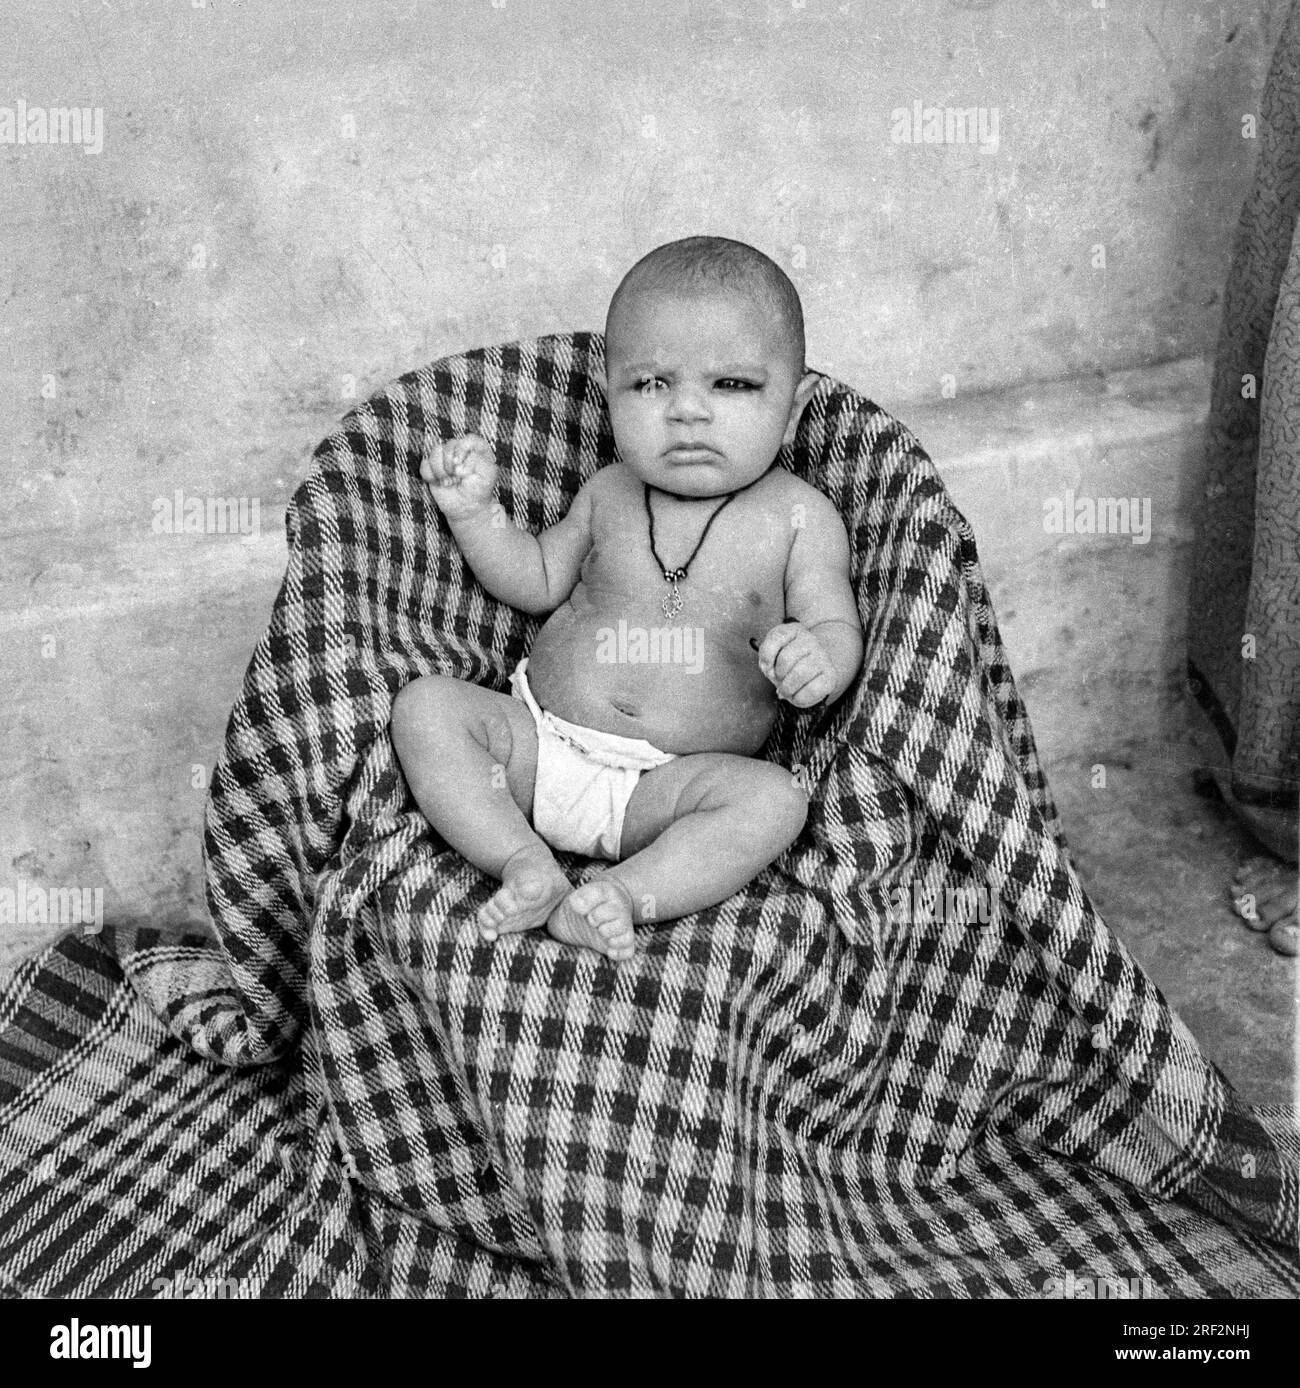 old vintage 1900s black and white studio portrait of Indian baby boy child wearing nappy diaper sitting stool India 1940s Stock Photo